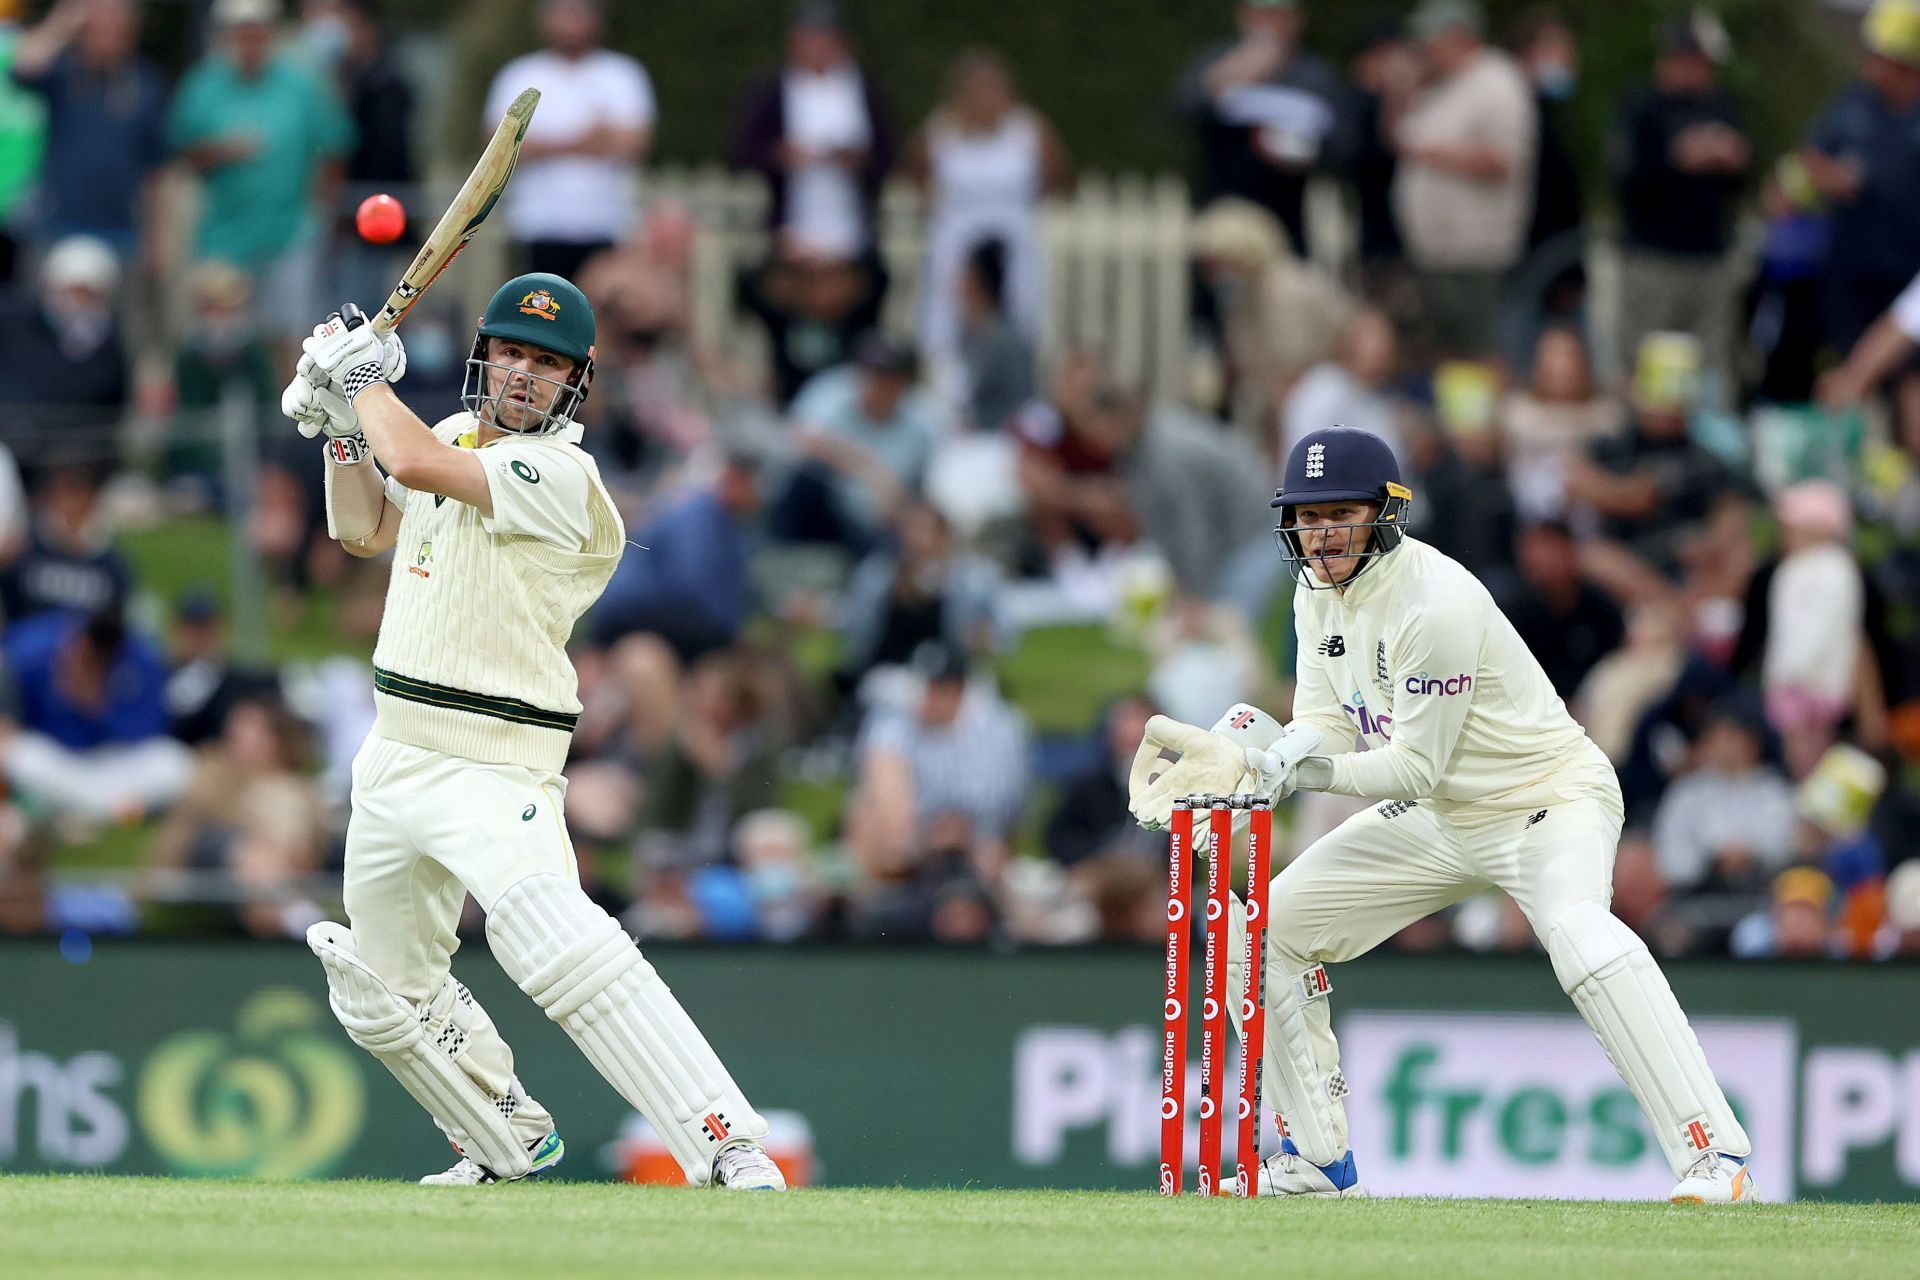 Travis Head batting during the Hobart Test. Pic: Getty Images